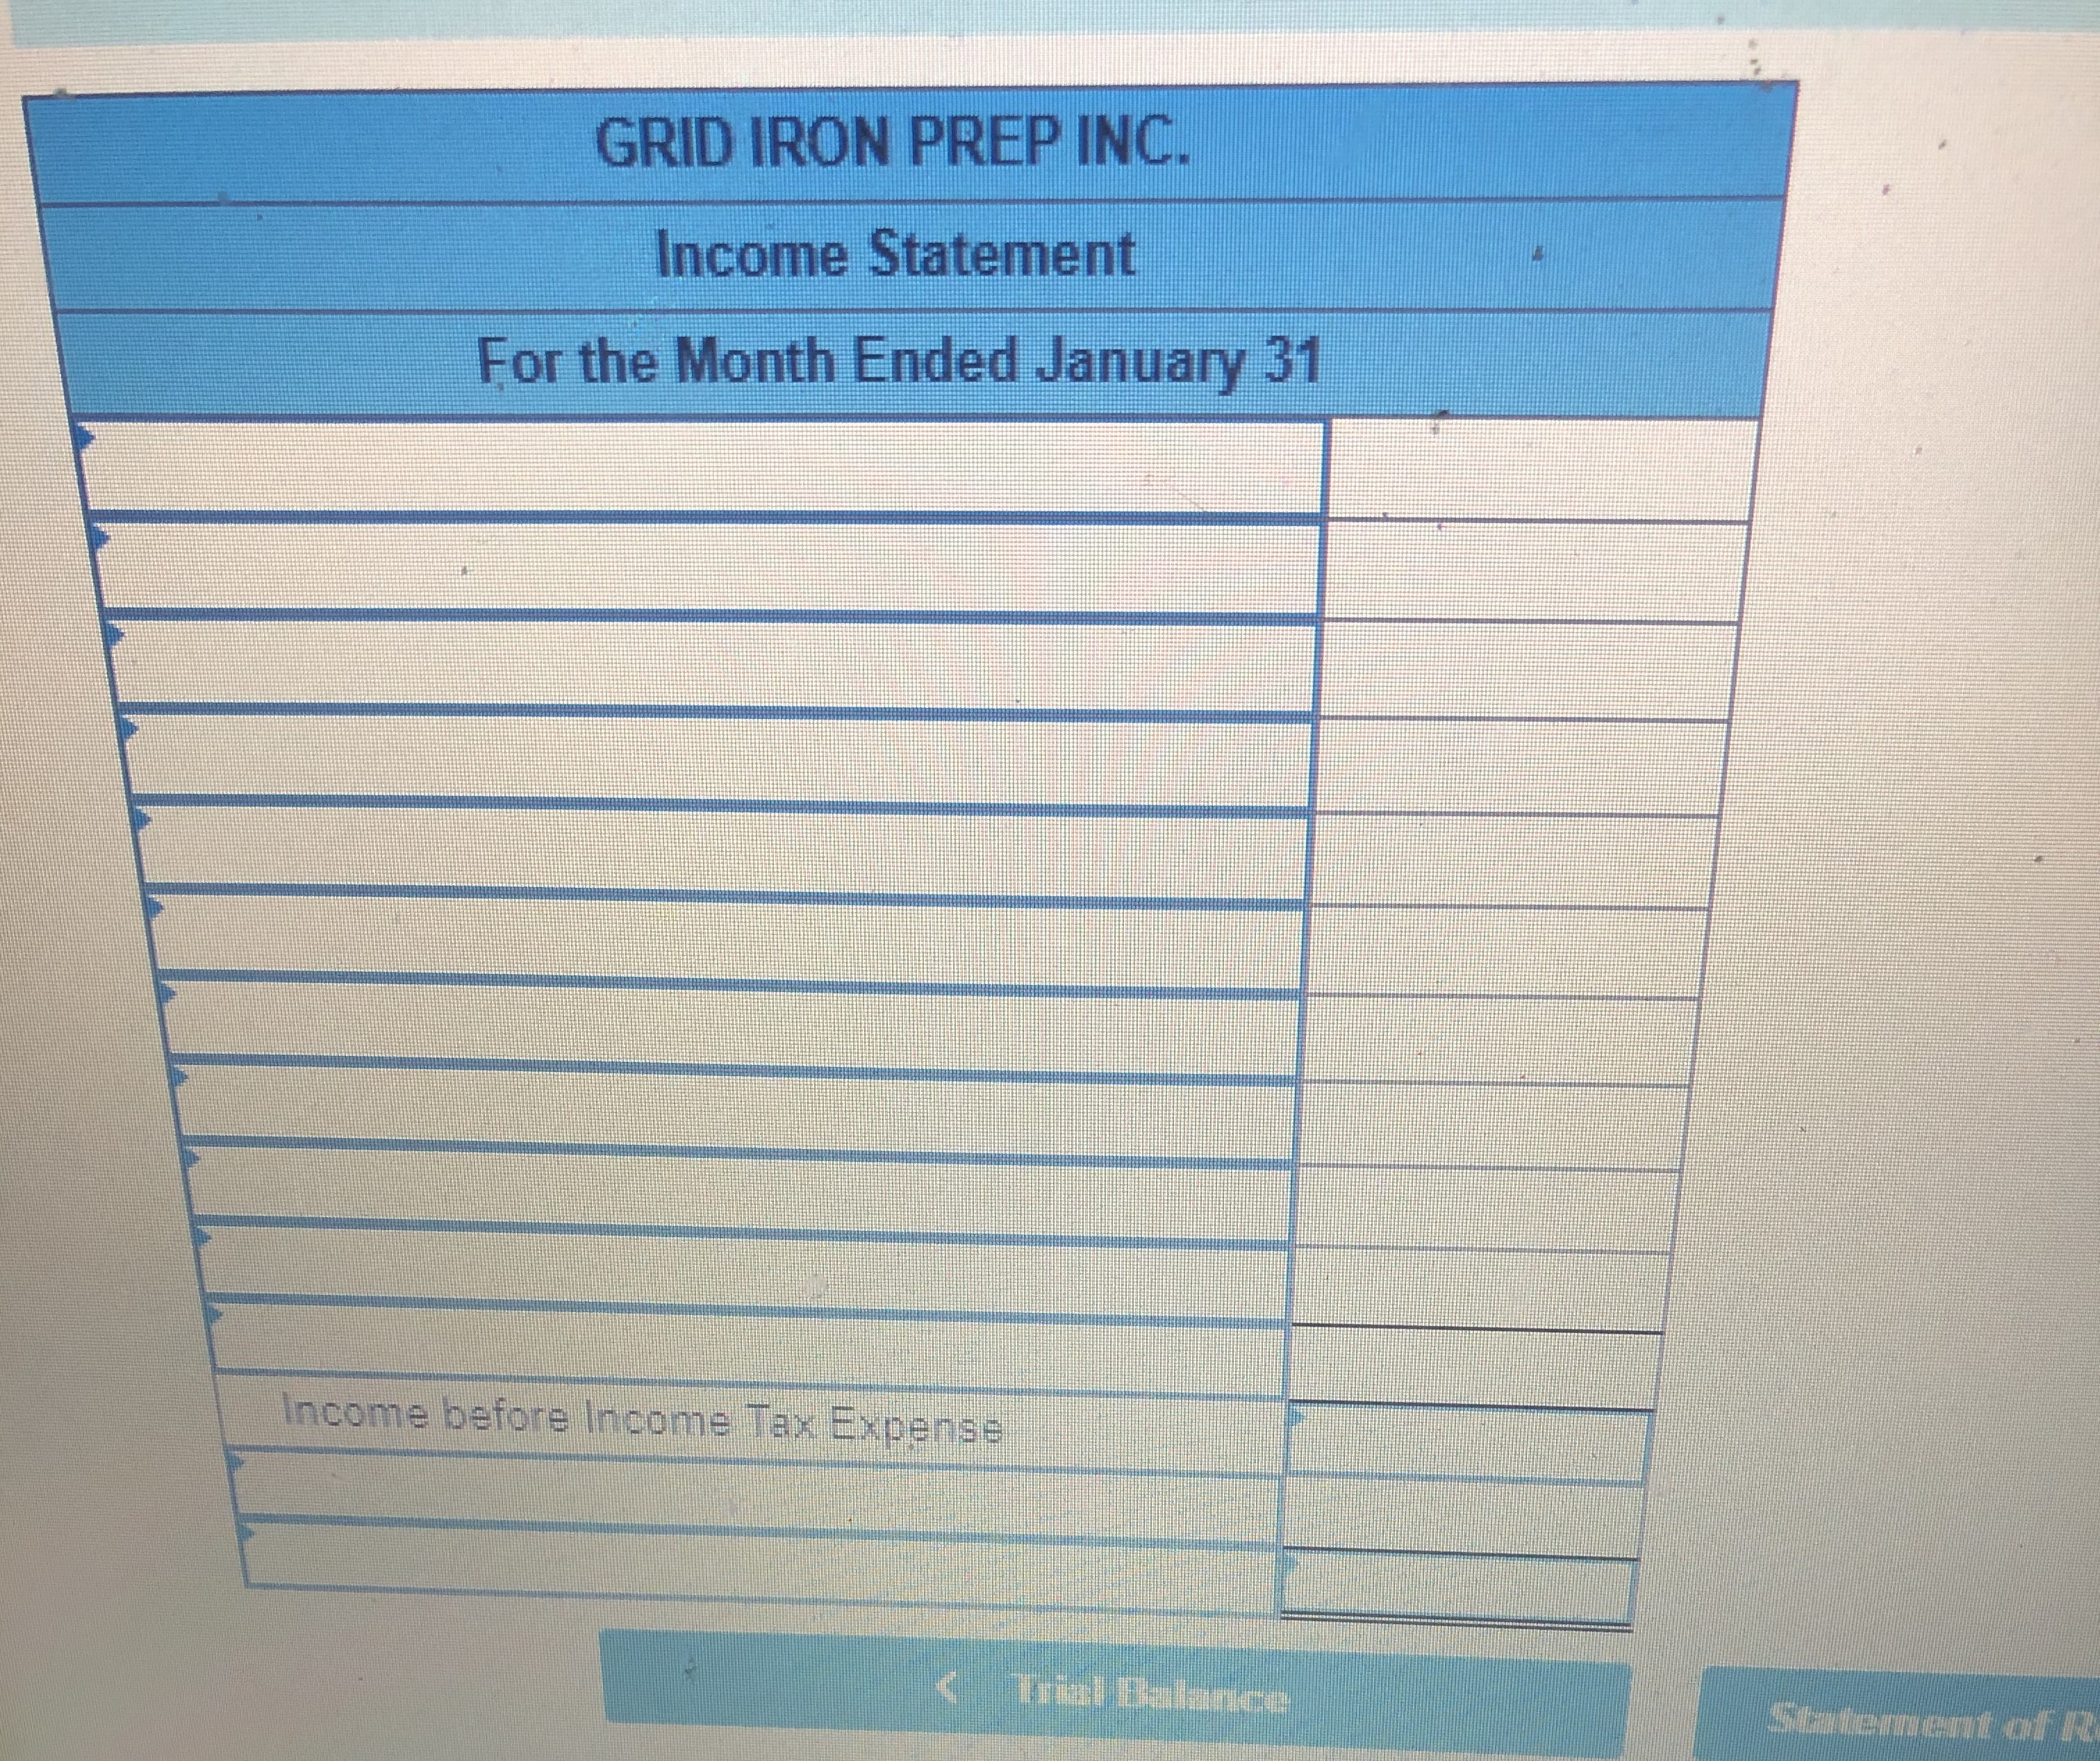 GRID IRON PREP INC.
Income Statement
For the Month Ended January 31
Income before Income Tax Expense
Trial Balance
Statement of R
